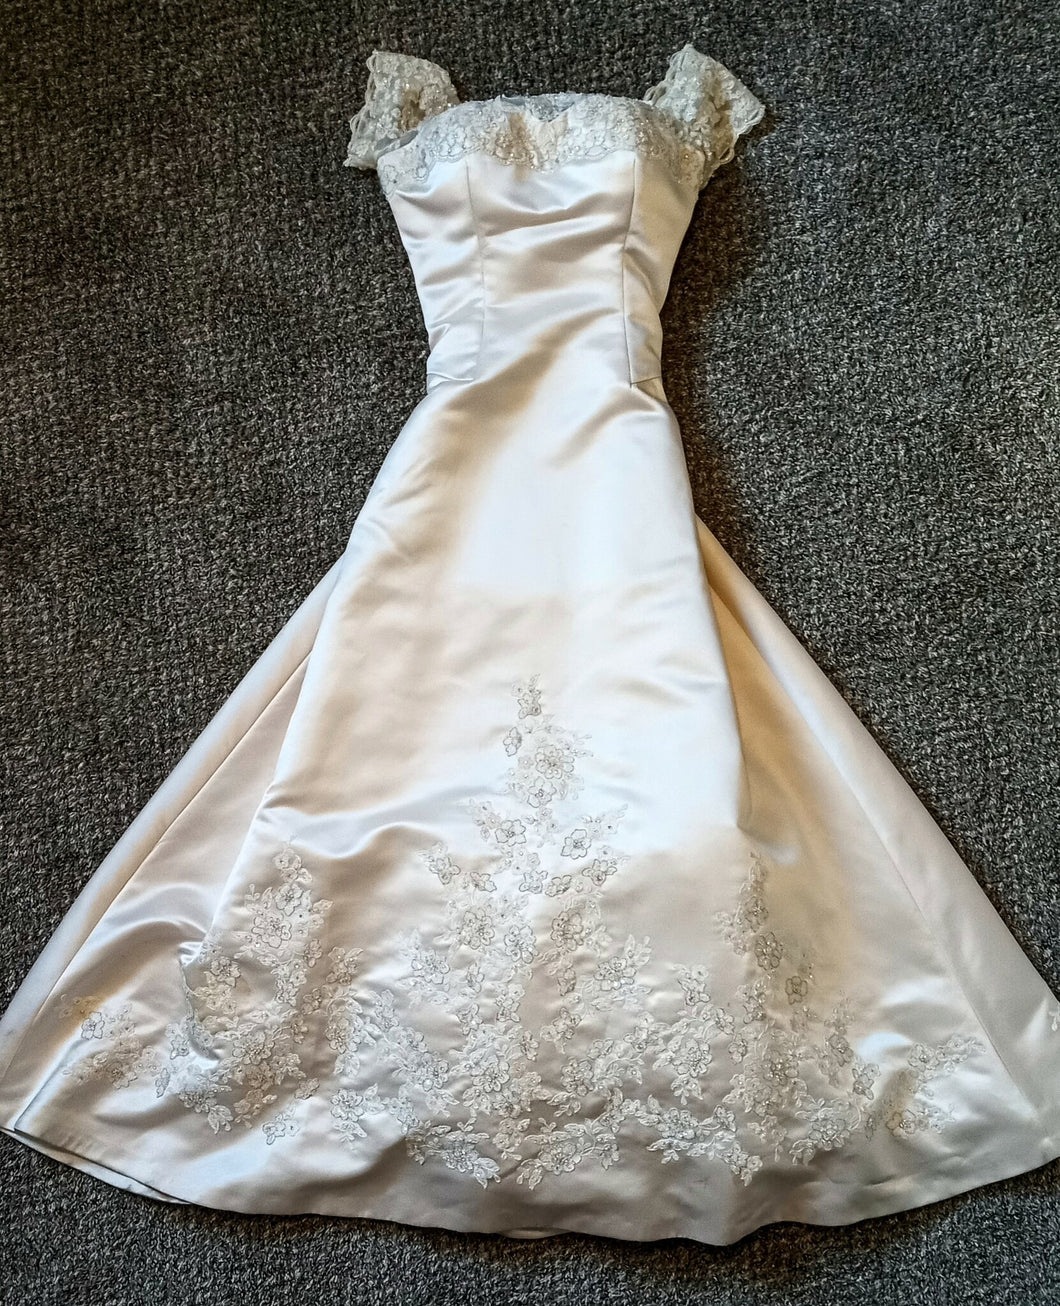 Anjolique Bridal 'Not sure' wedding dress size-08 PREOWNED